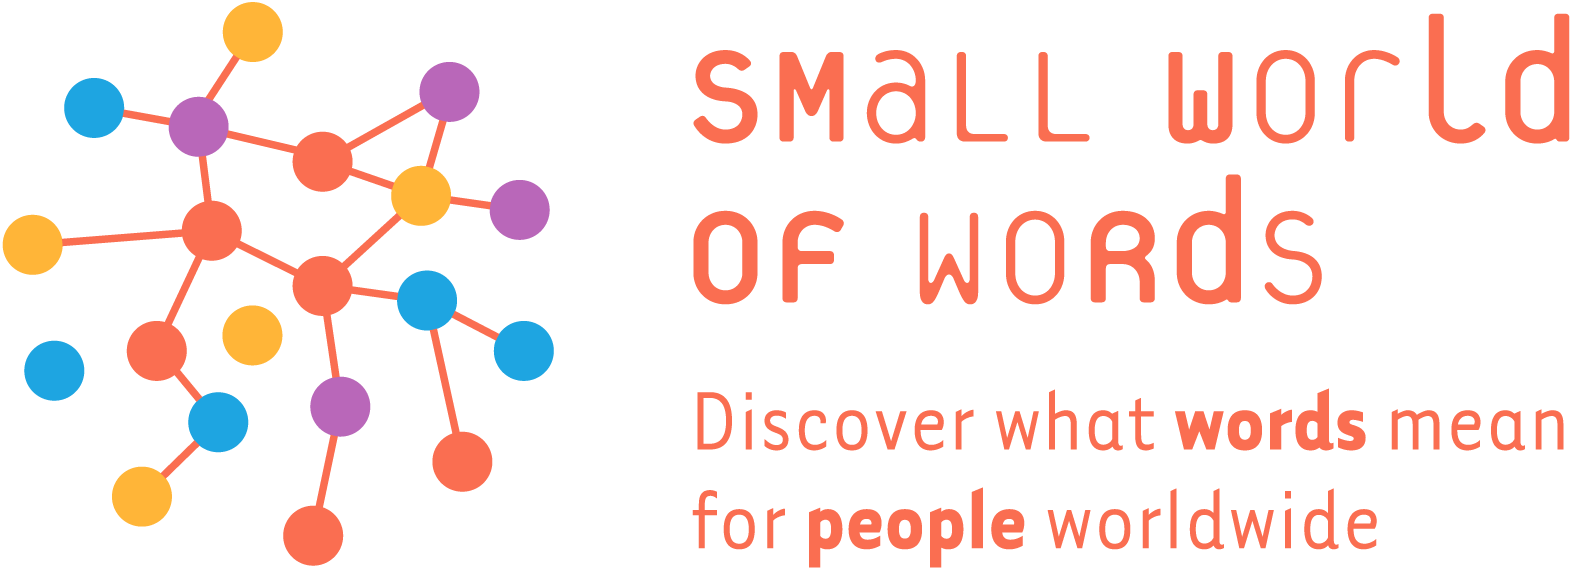 Small World of Words - Discover what words mean to people worldwide.